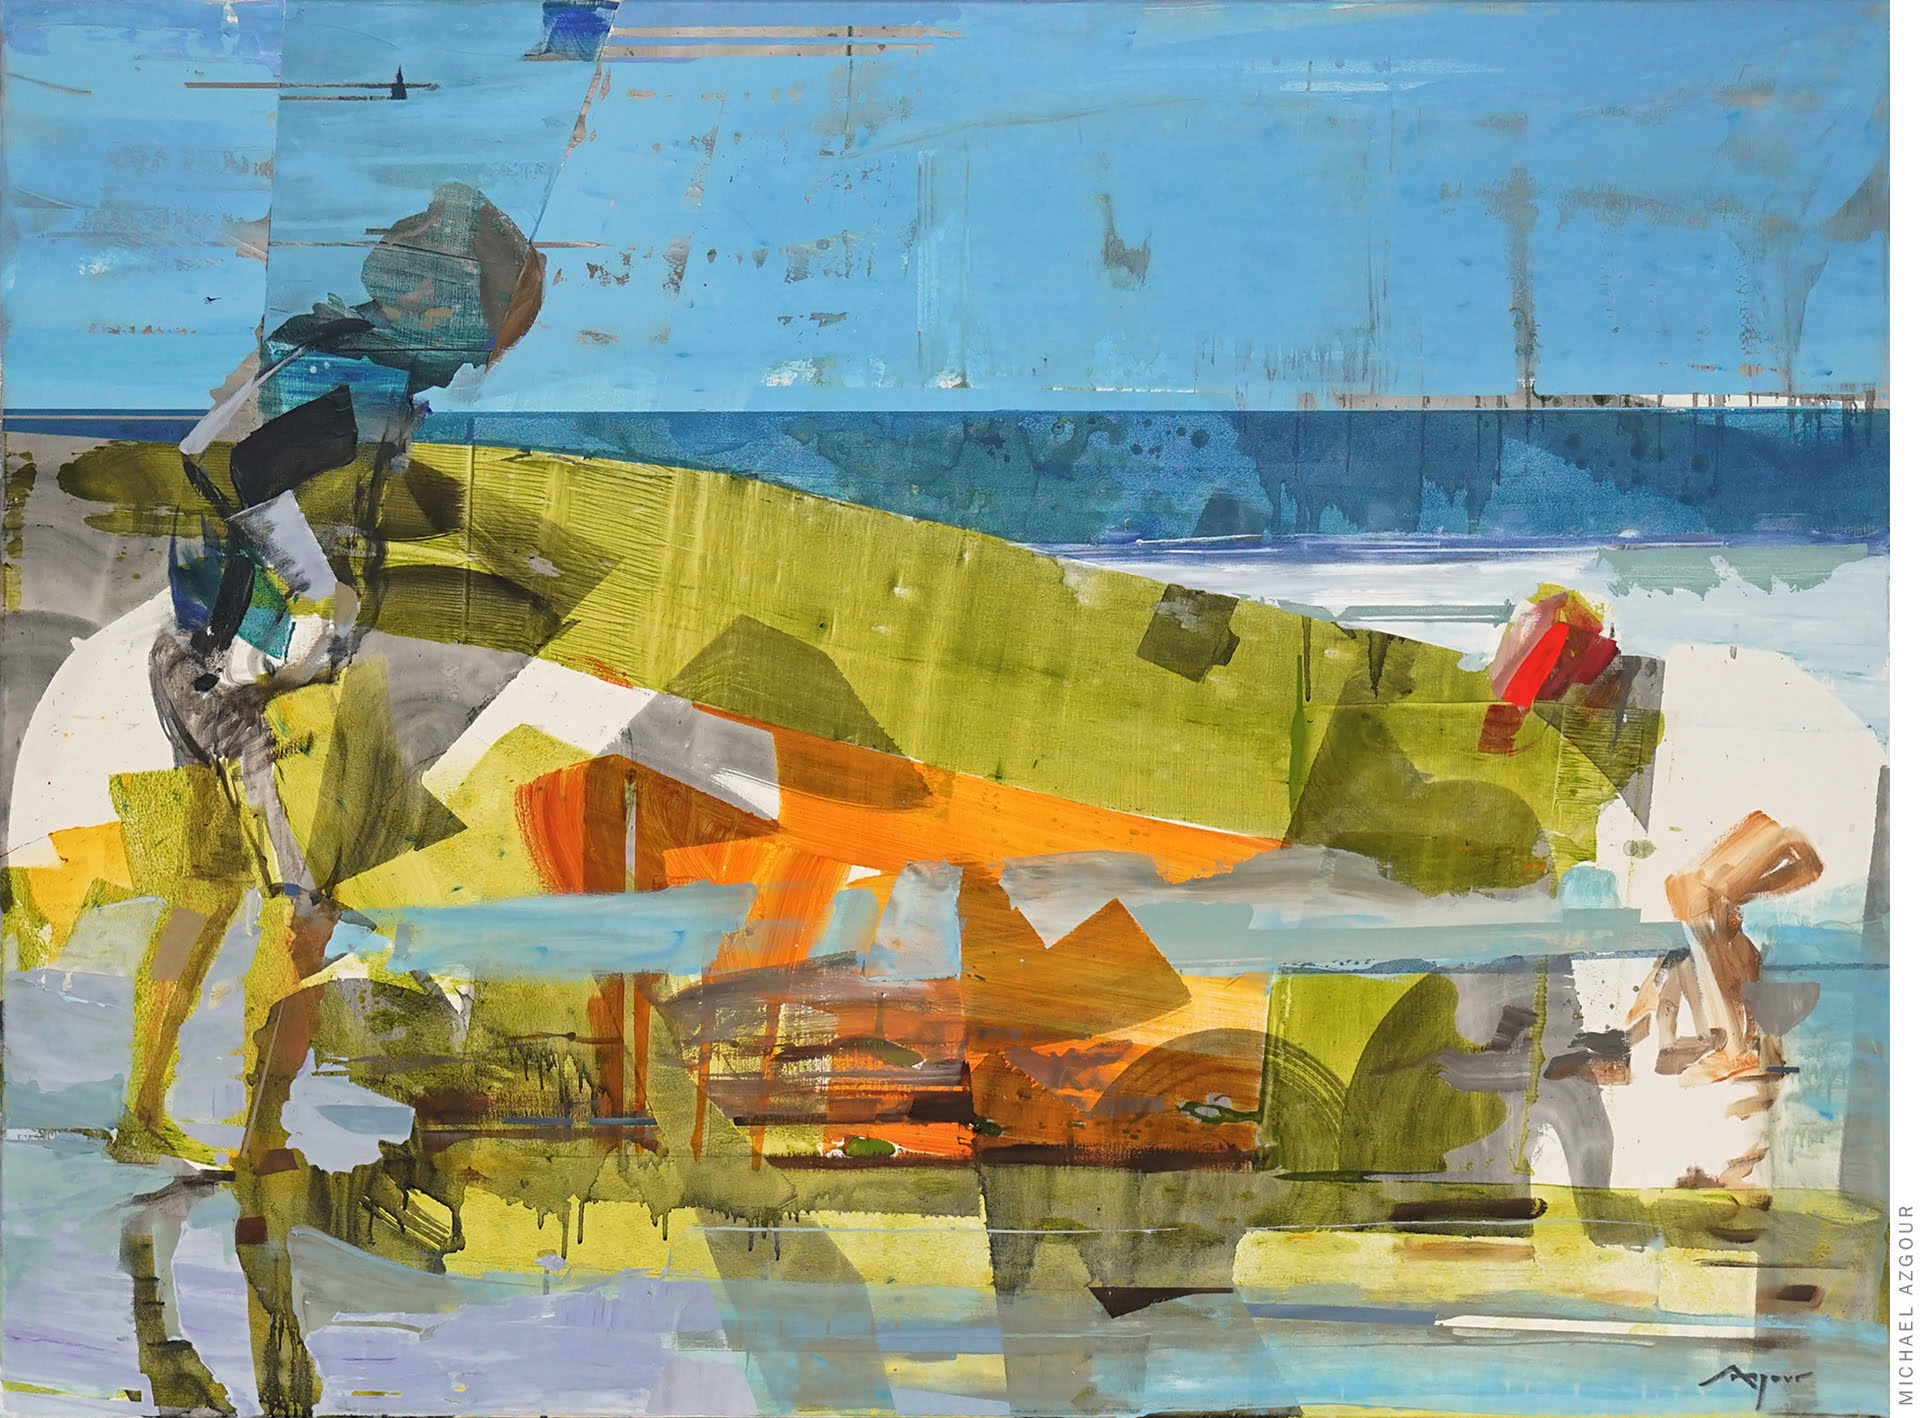 Abstract expressive figurative painting titled Boys at the Beach by Californian artist Michael Azgour